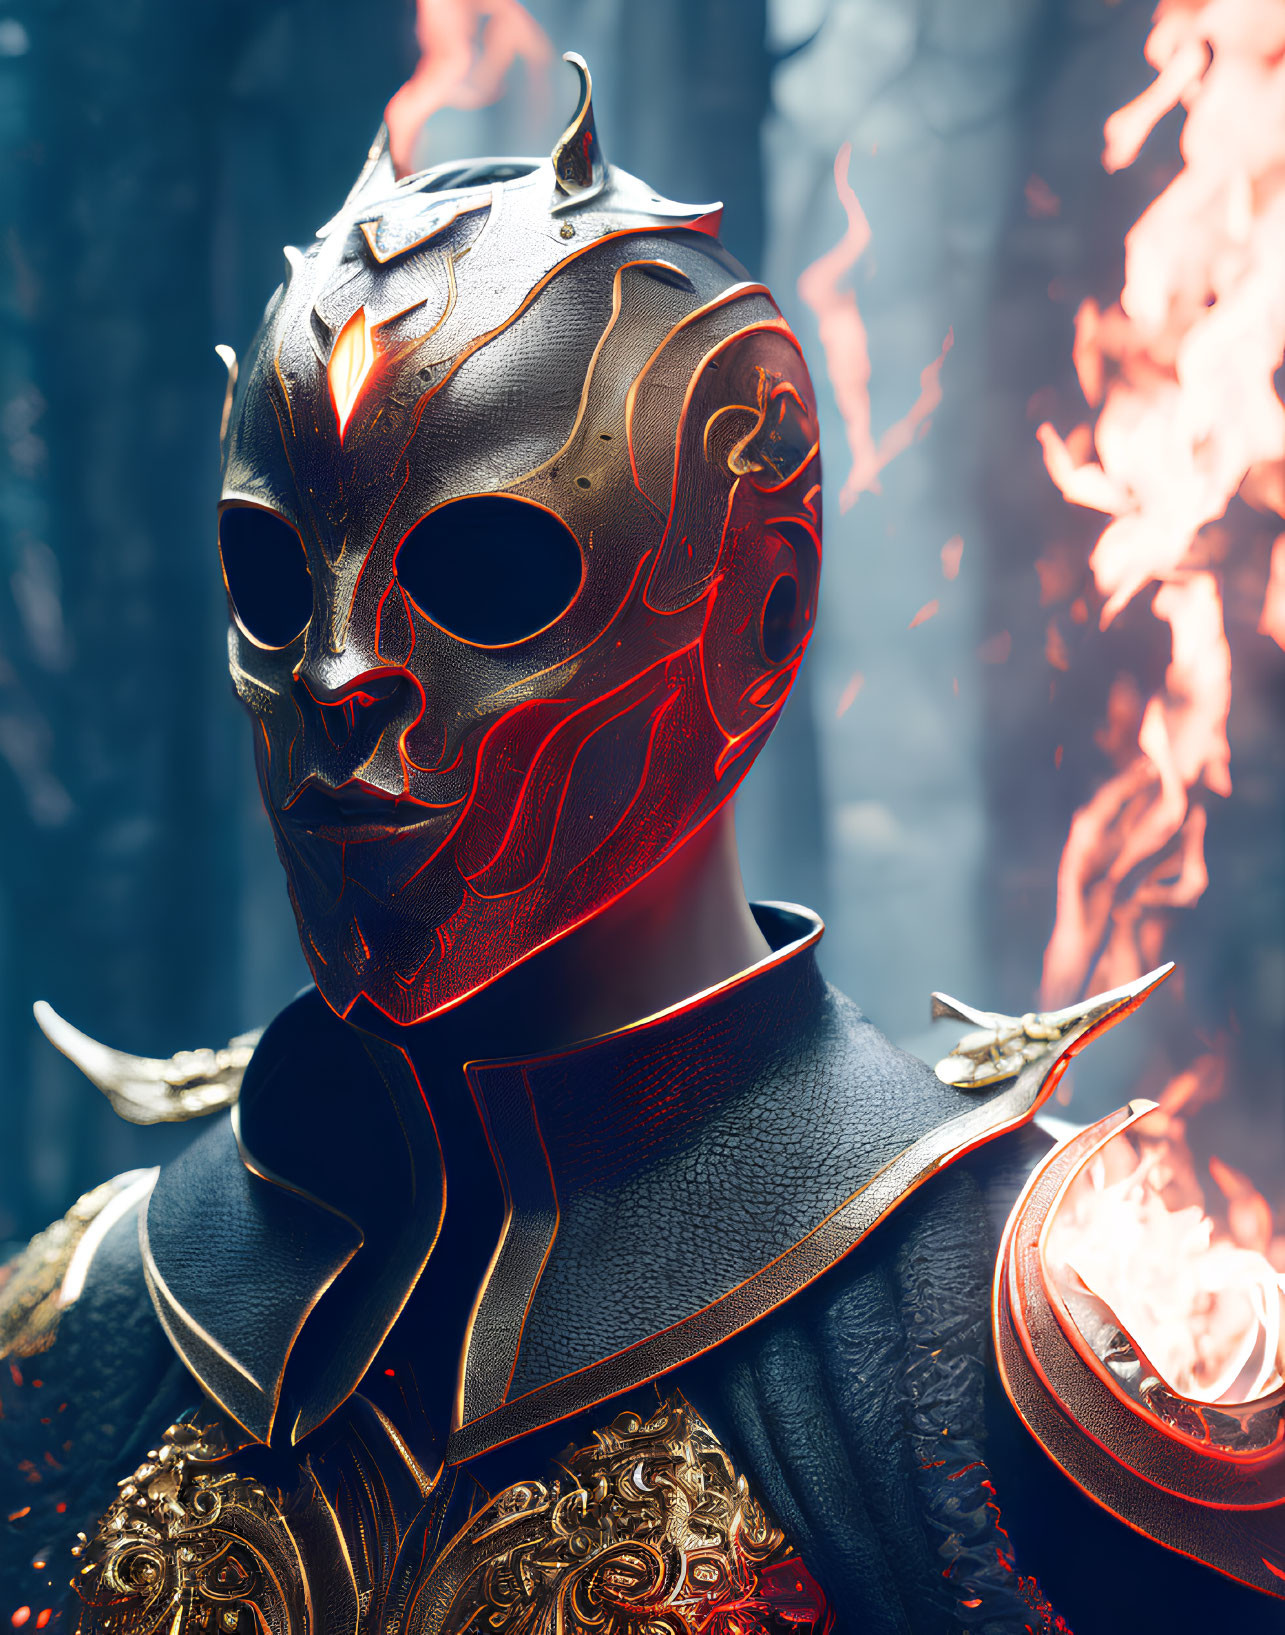 Stylized metallic mask with red glowing patterns in fiery background